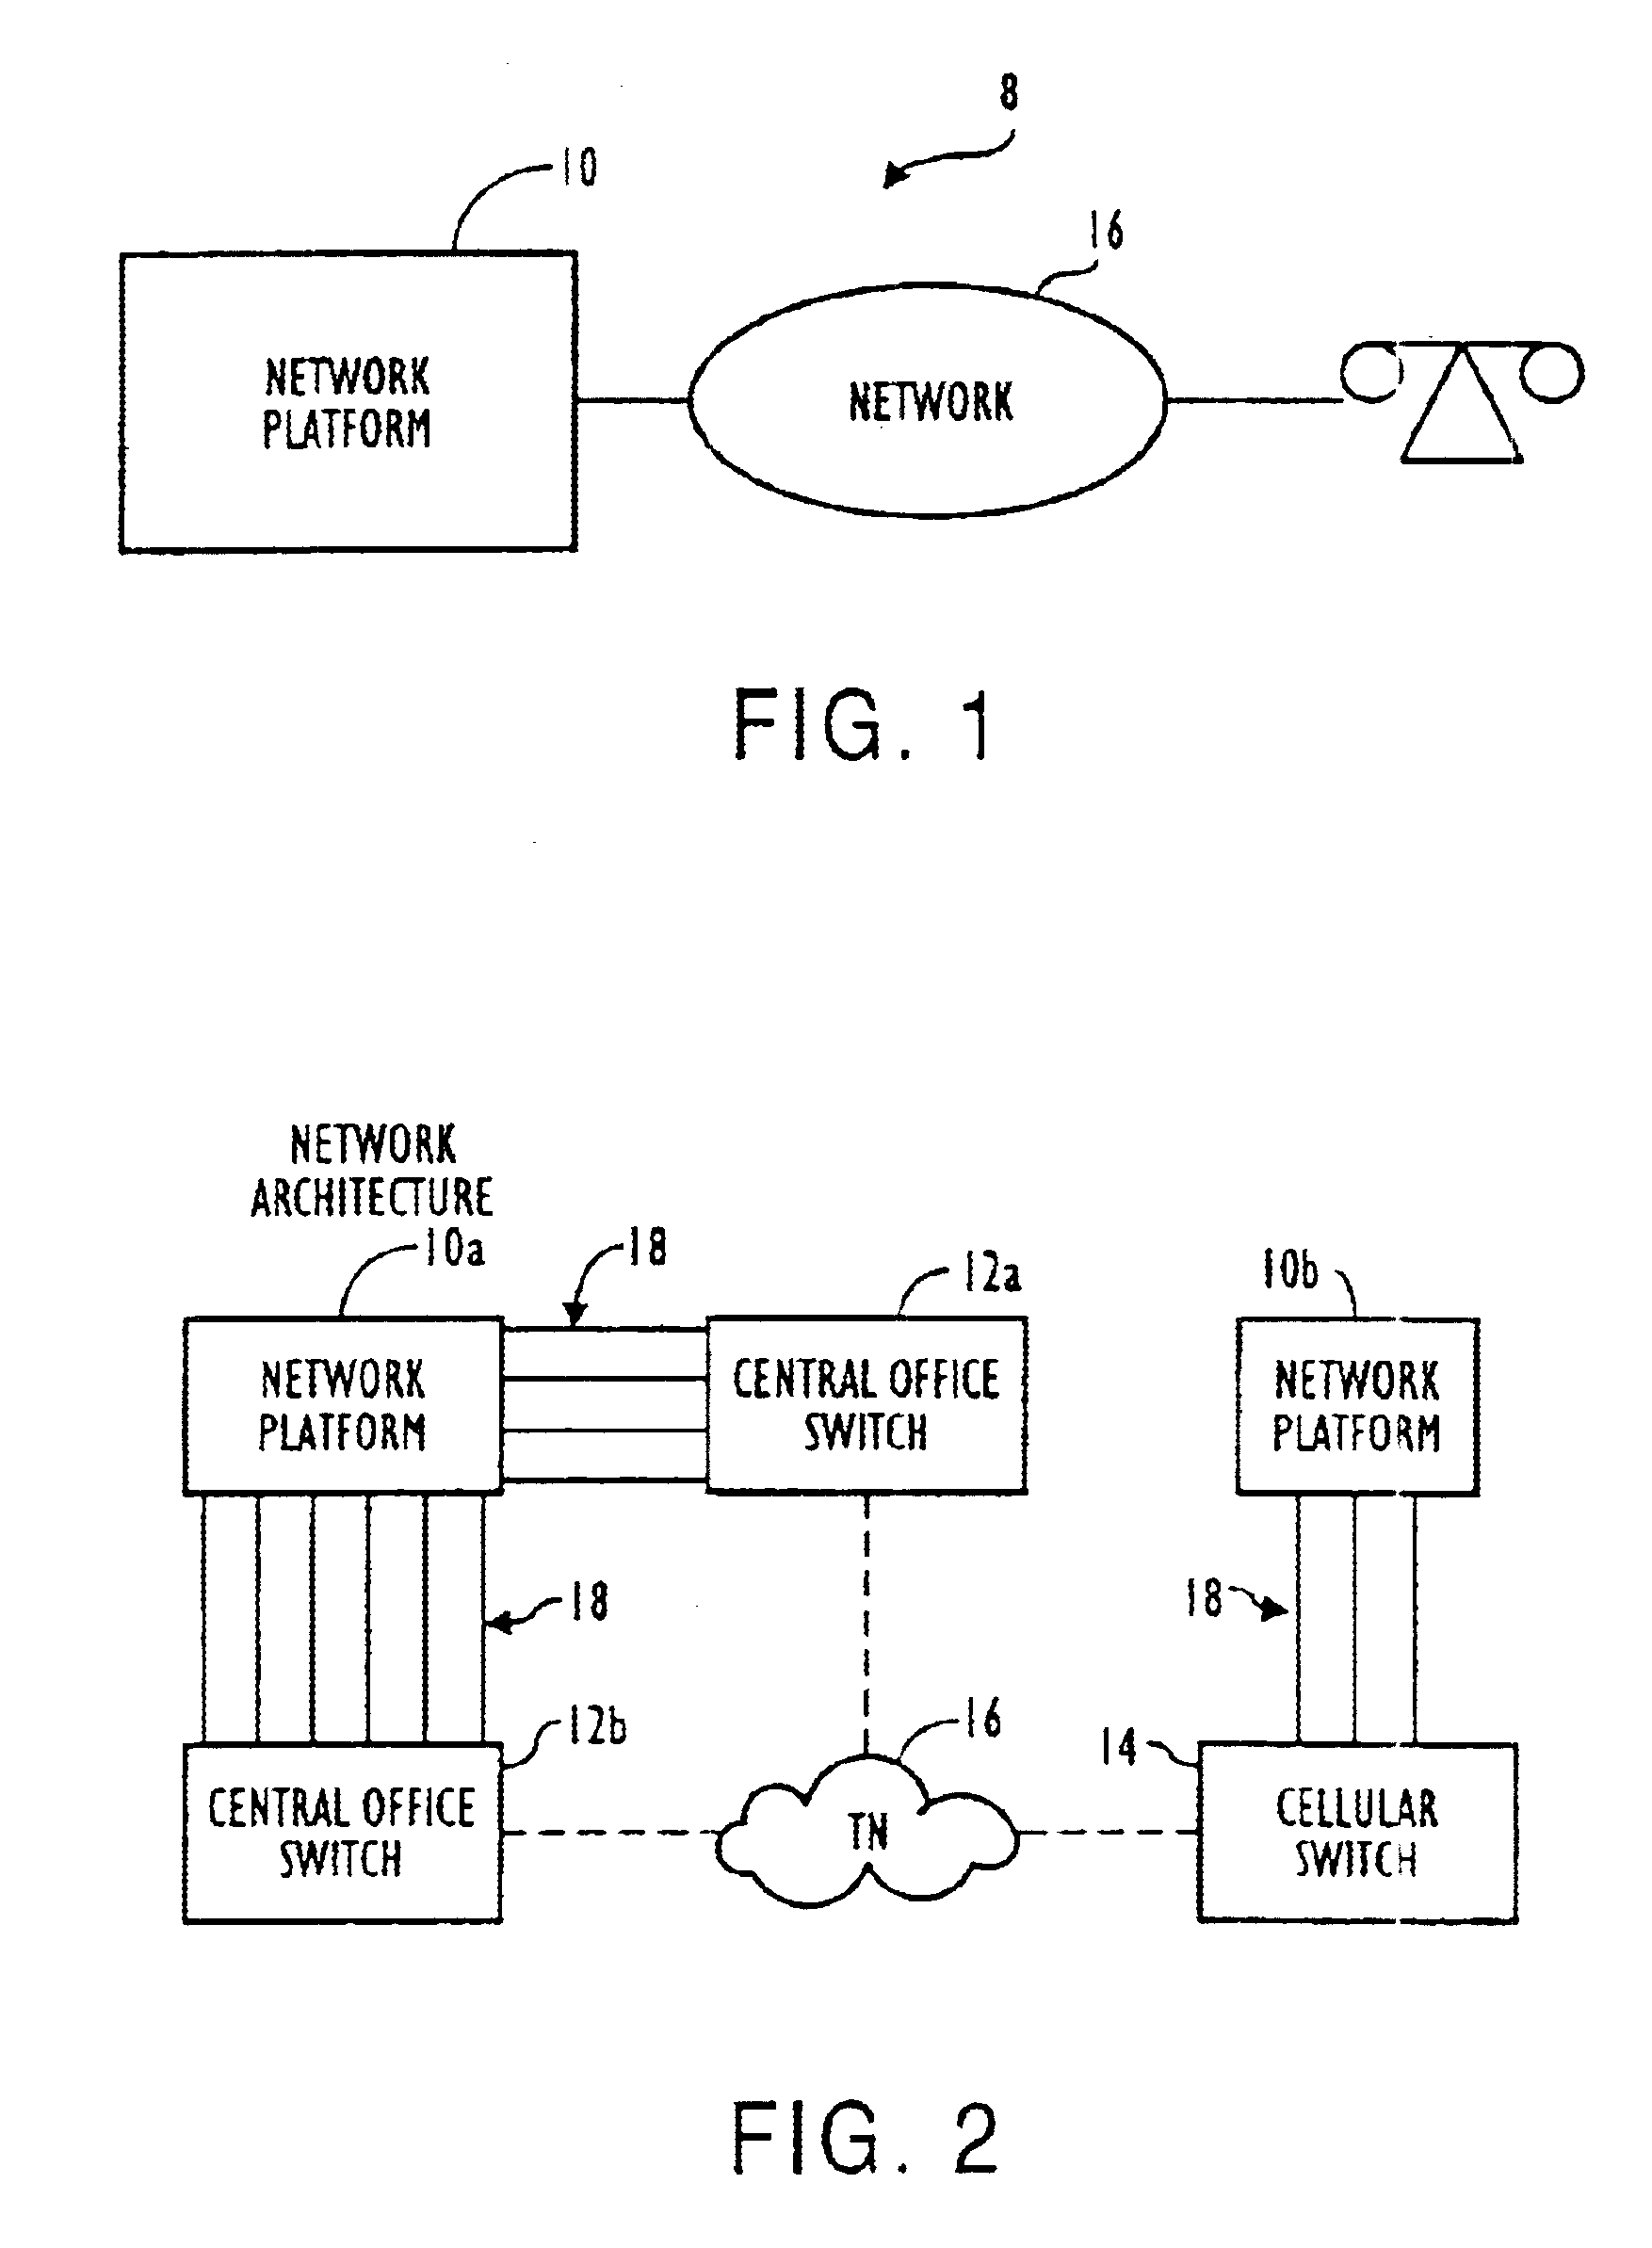 Flexible network platform and call processing system